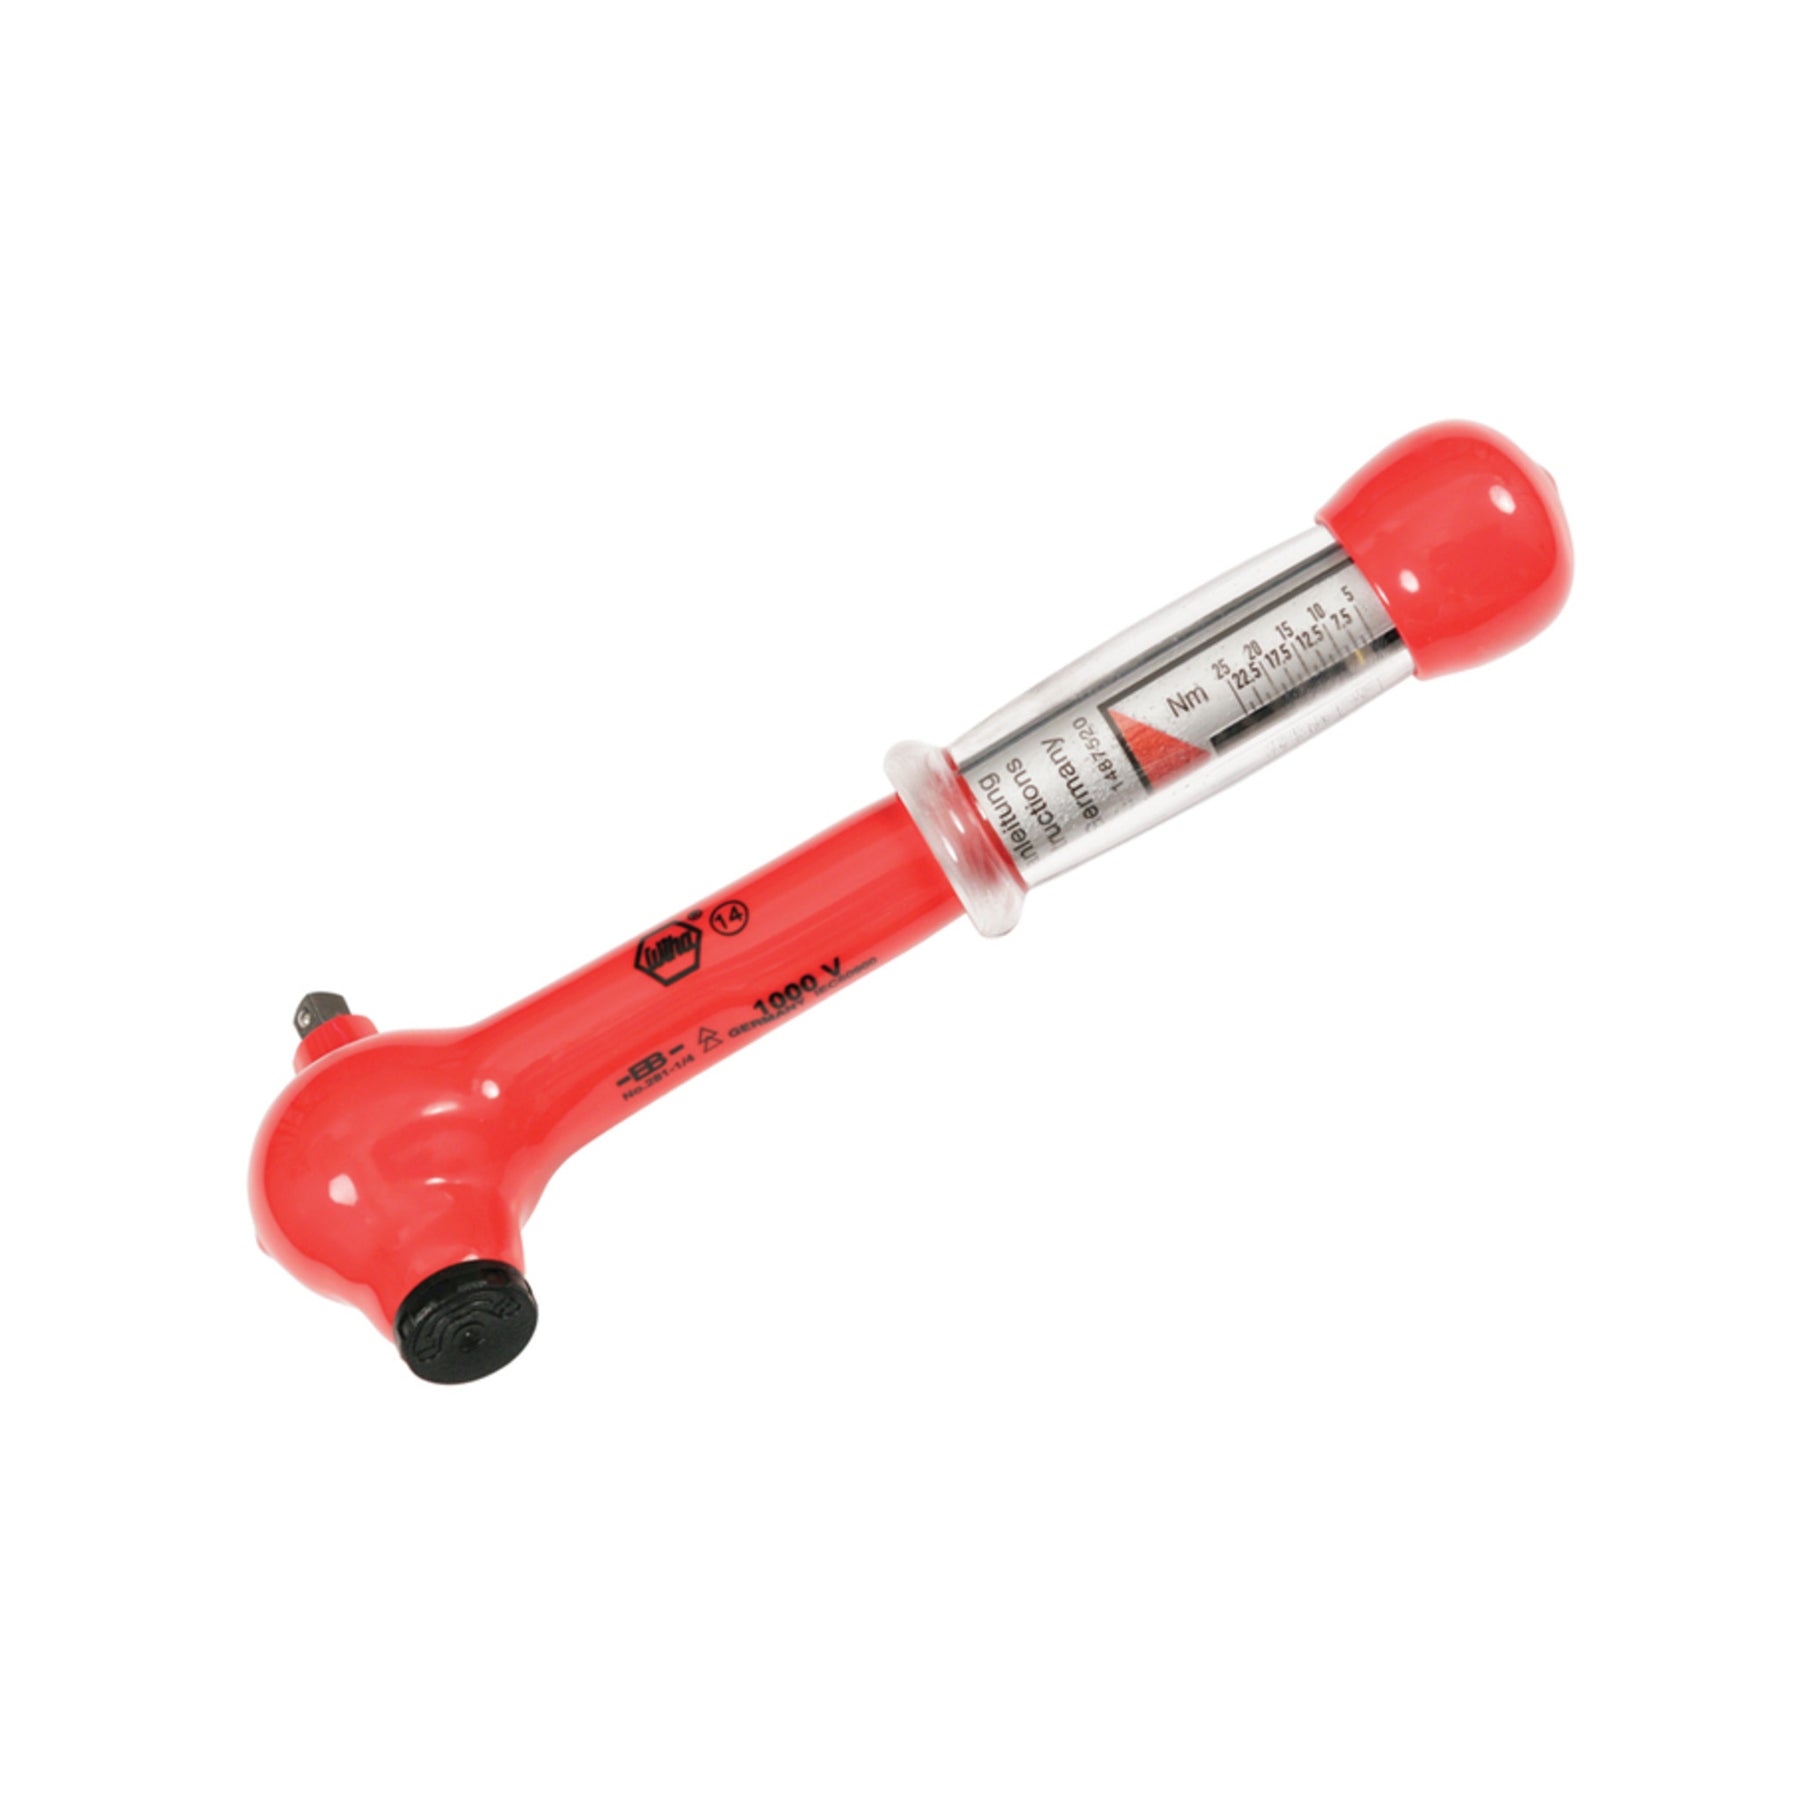 Wiha 30114 Insulated Ratcheting Torque Wrench 1/4" Drive 5-25 Nm